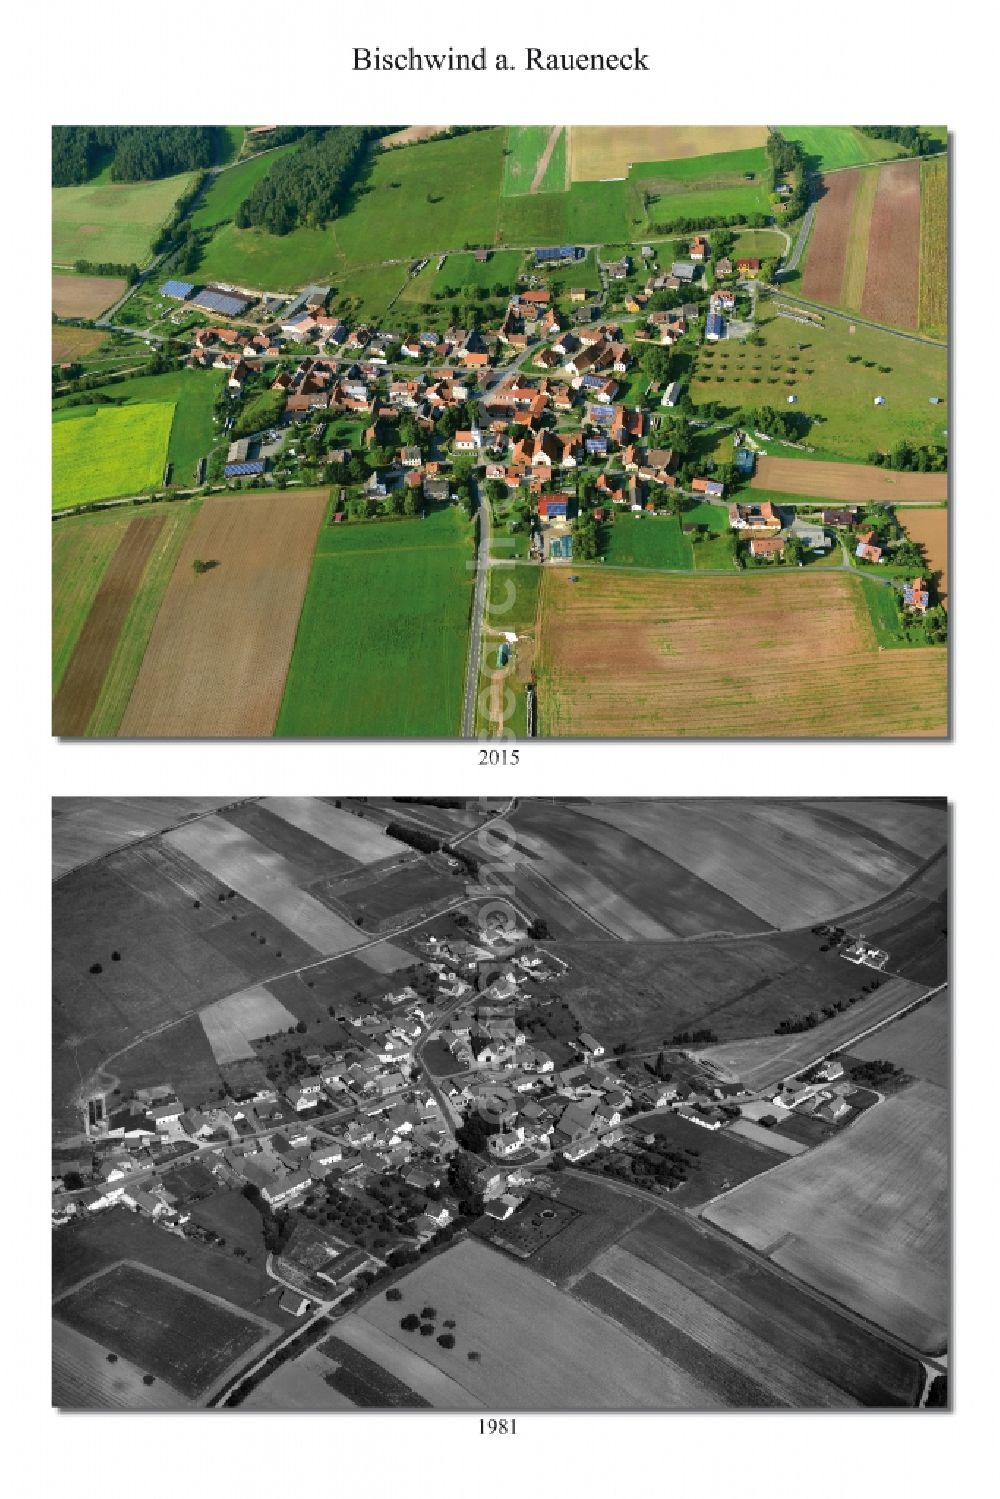 Bischwind a. Raueneck from the bird's eye view: 1981 and 2015 village - view change of the district of Hassberge belonging municipality in Bischwind a. Raueneck in the state Bavaria